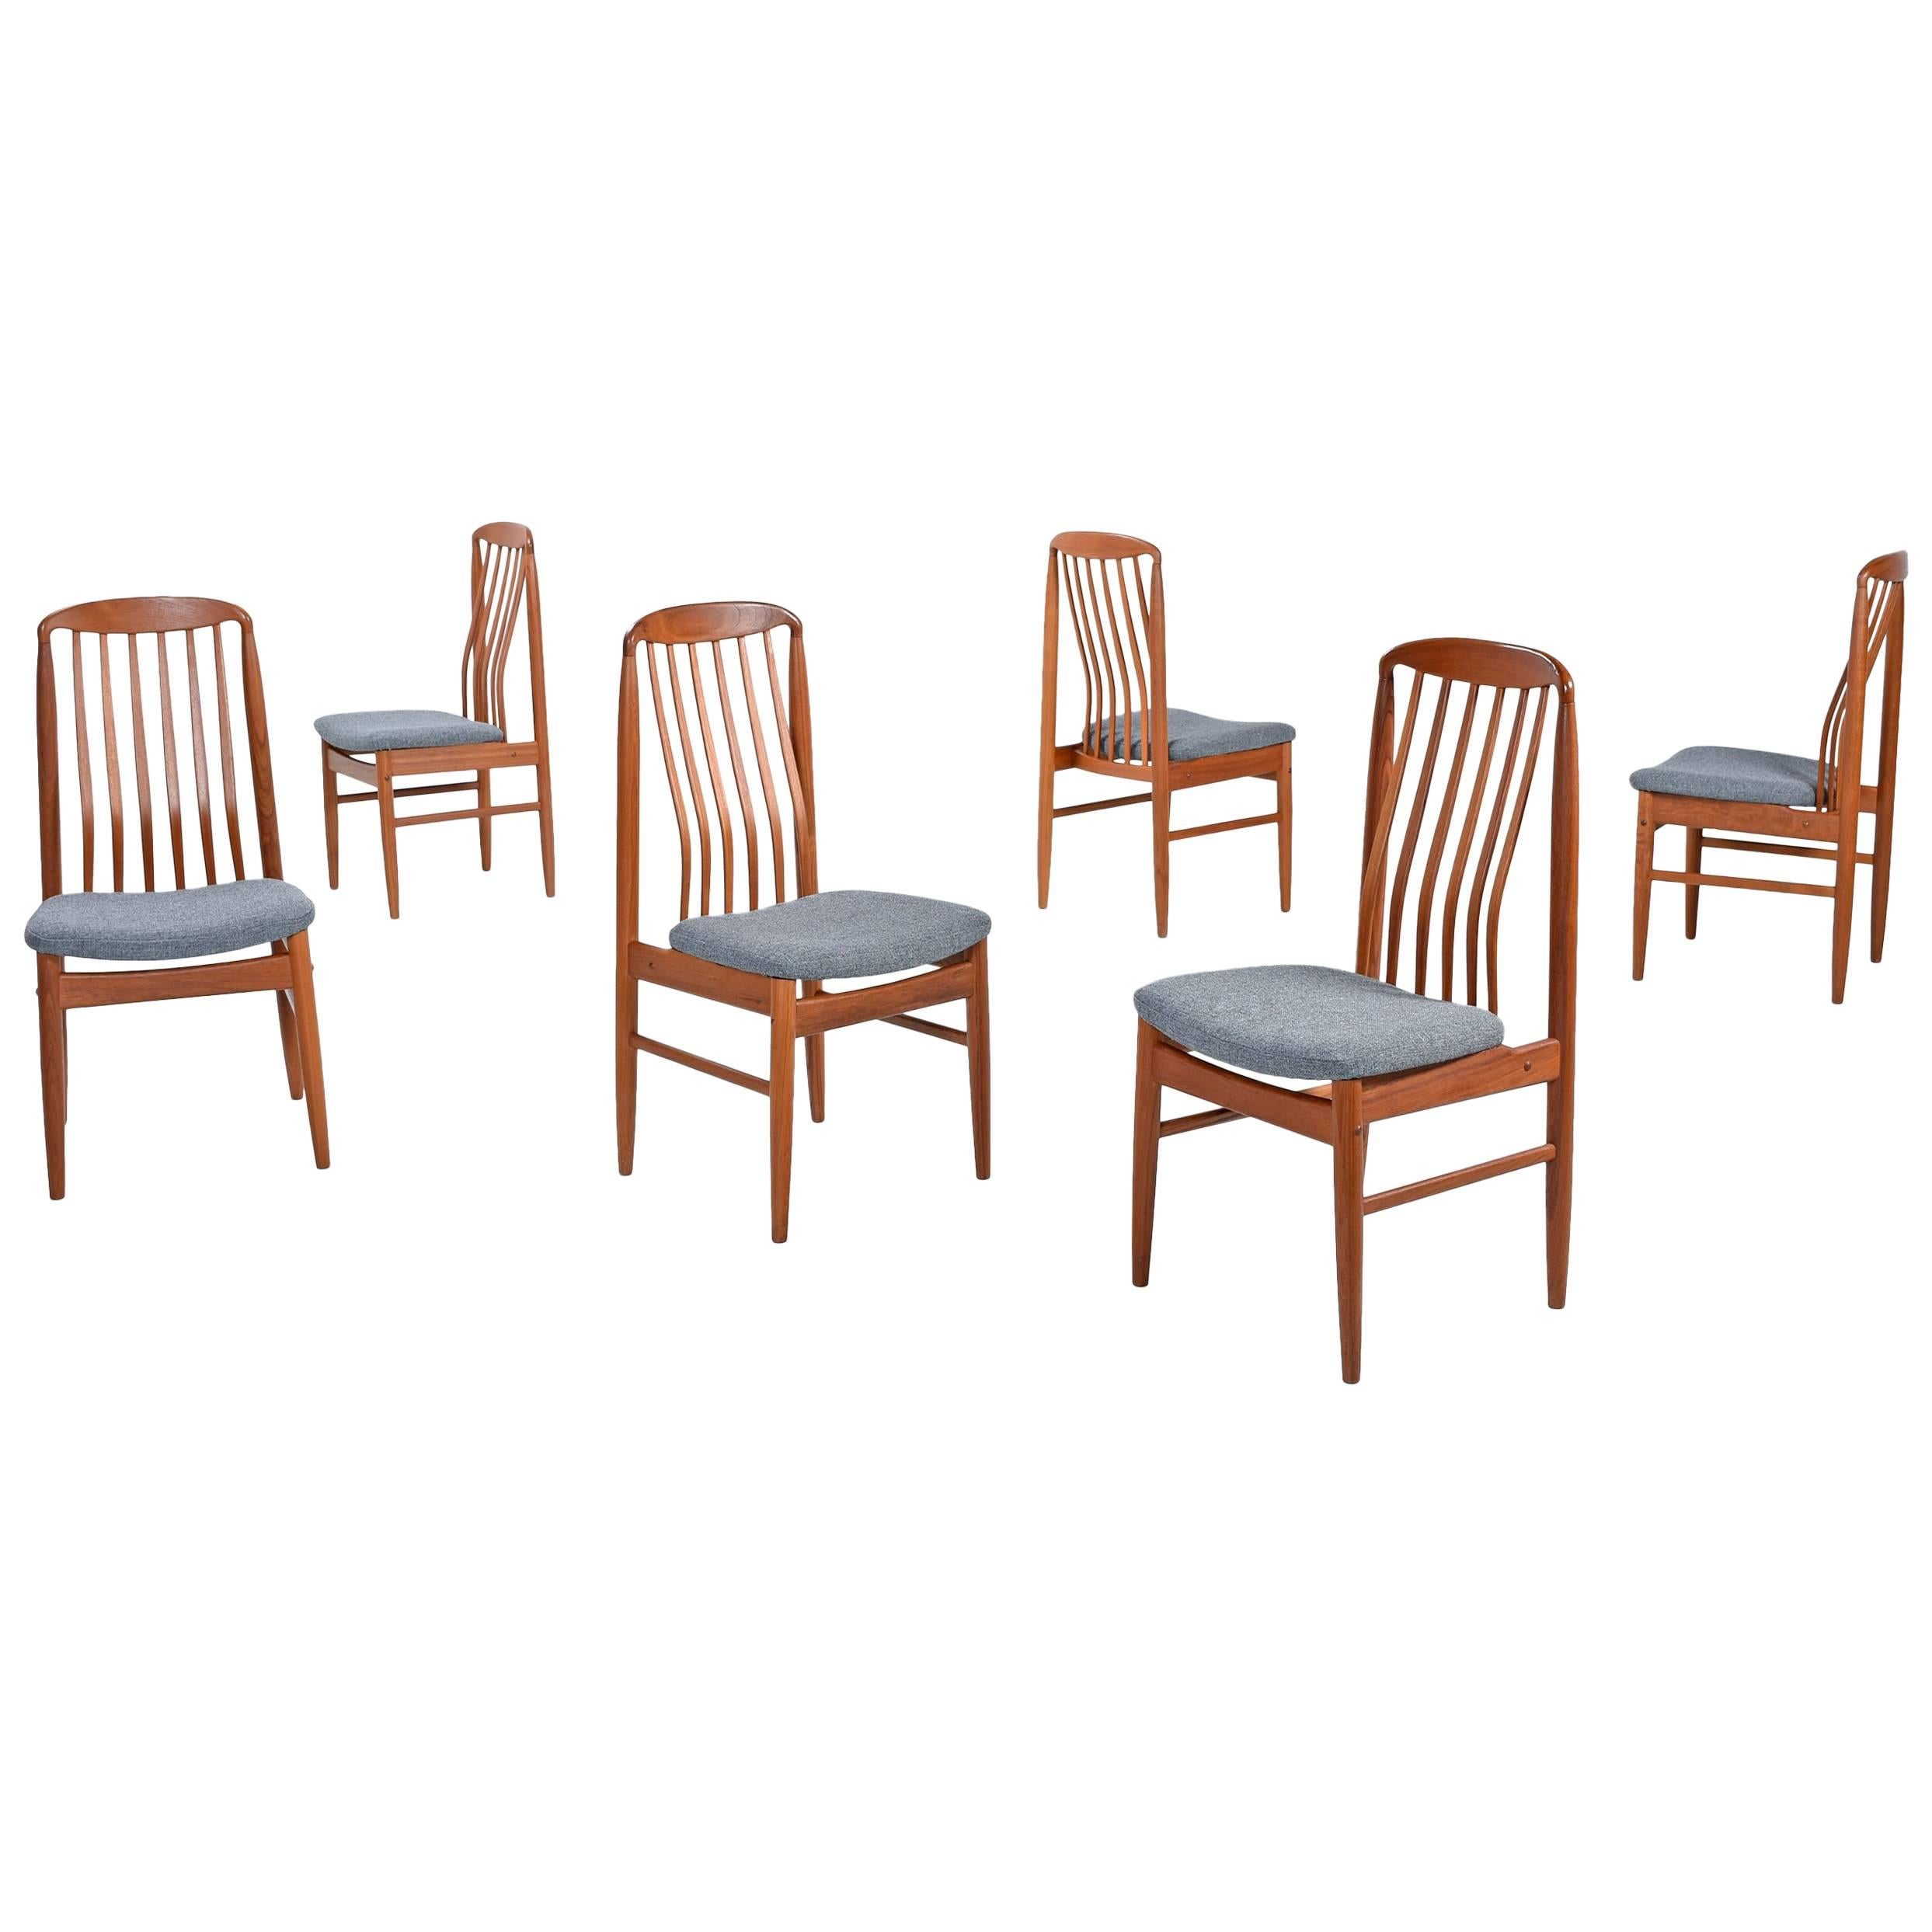 Benny Linden BL10 Dining Chairs